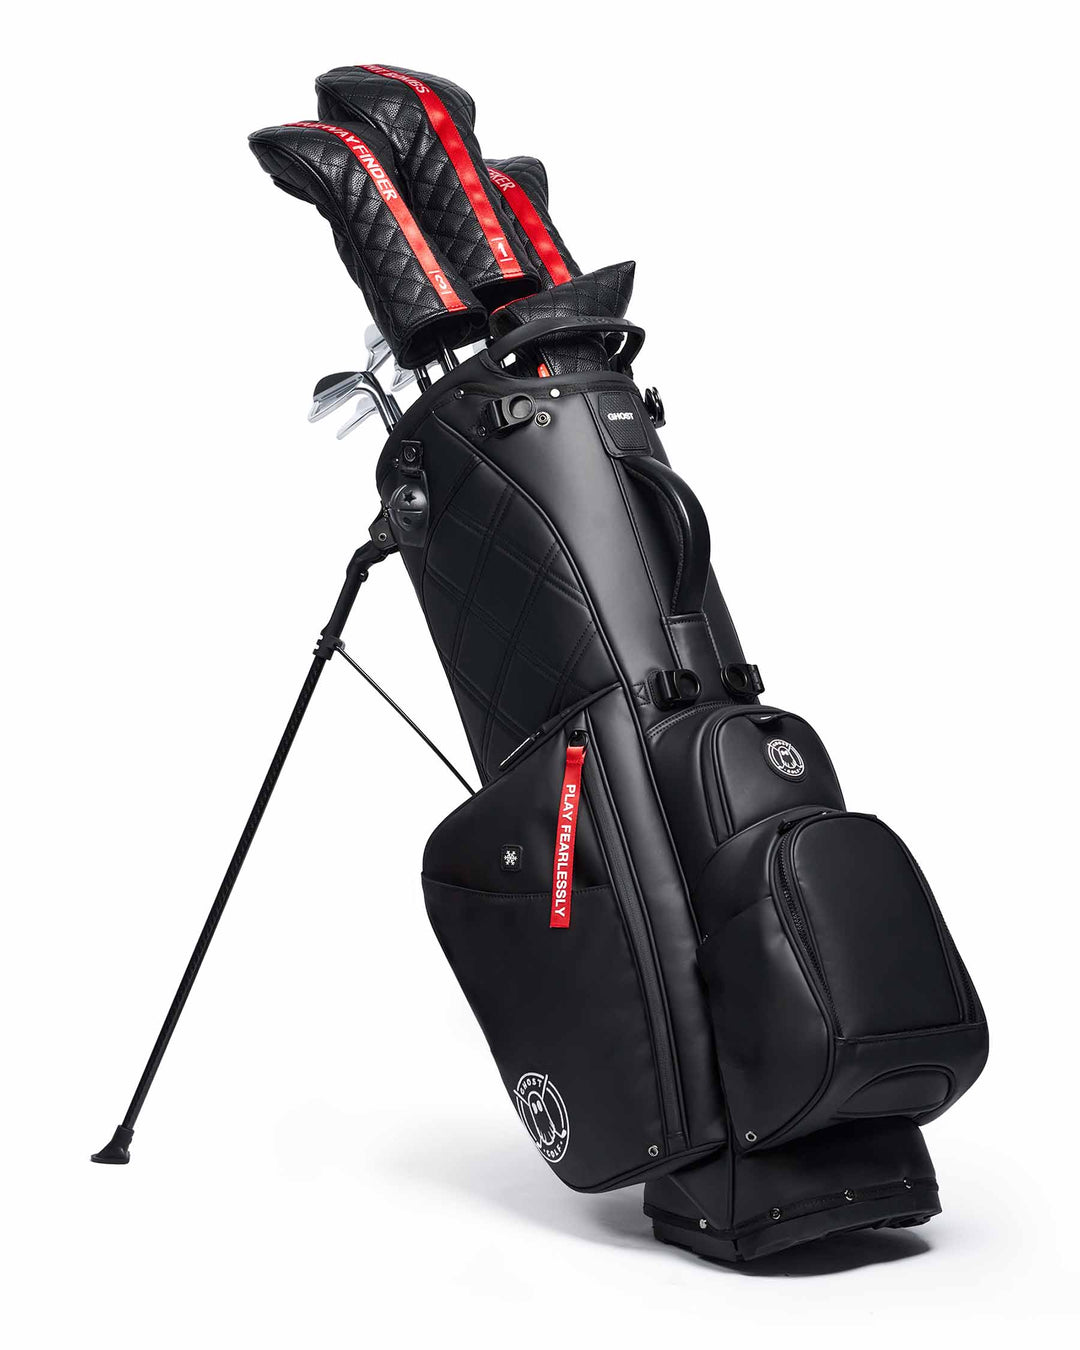 Ghost Golf Katana Black Leather Golf Bag with Red Tags. With Golf Clubs and Head Covers